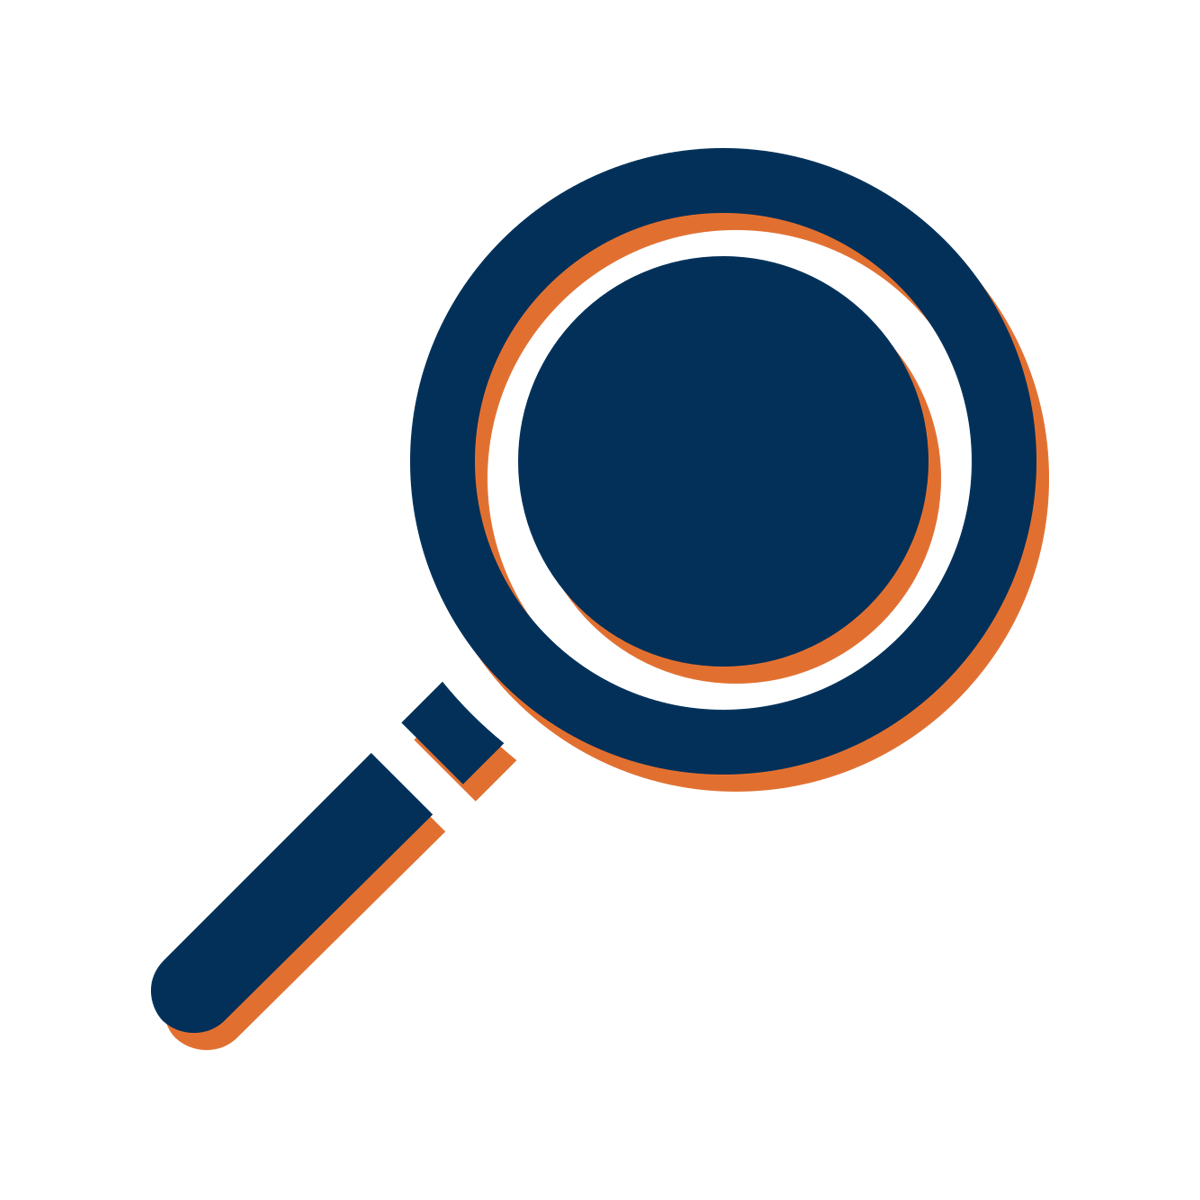 Magnifying glass graphic